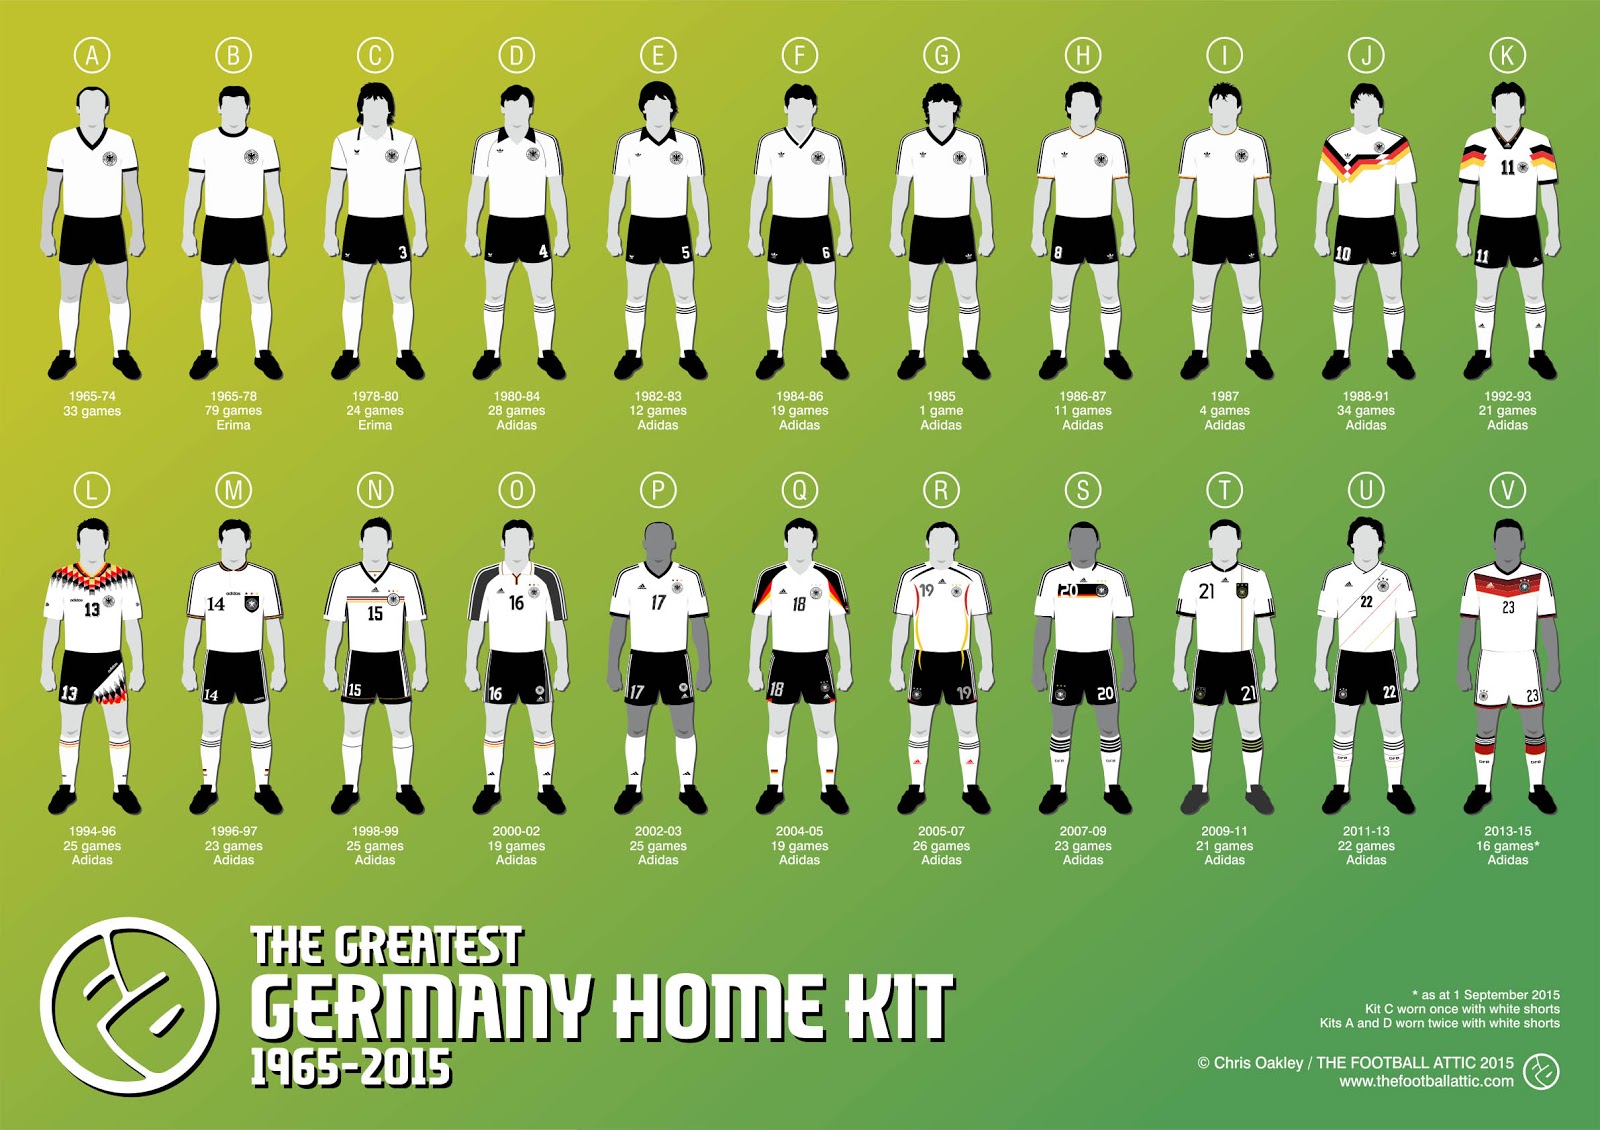 Germany's soccer traditions in jerseys